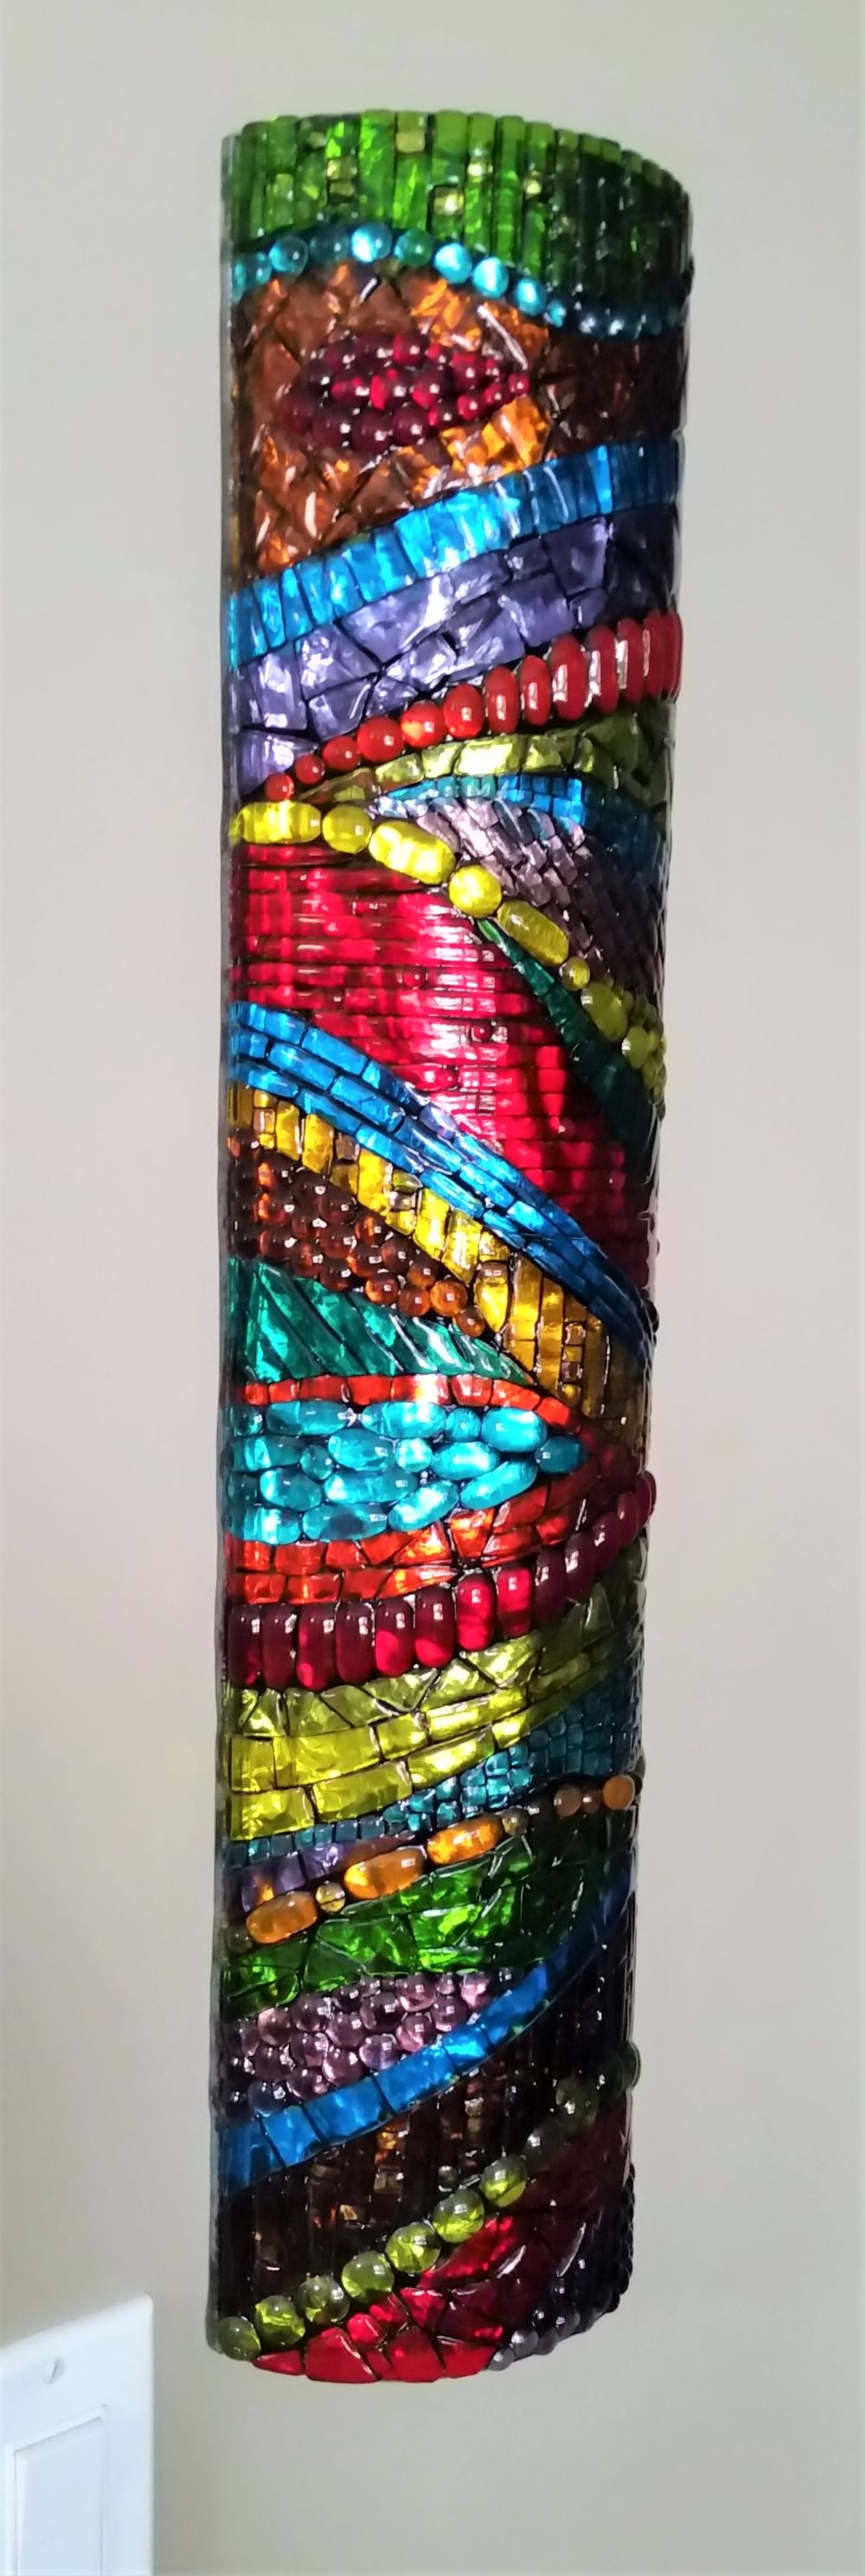 side view of glass art sconce shown on a wall